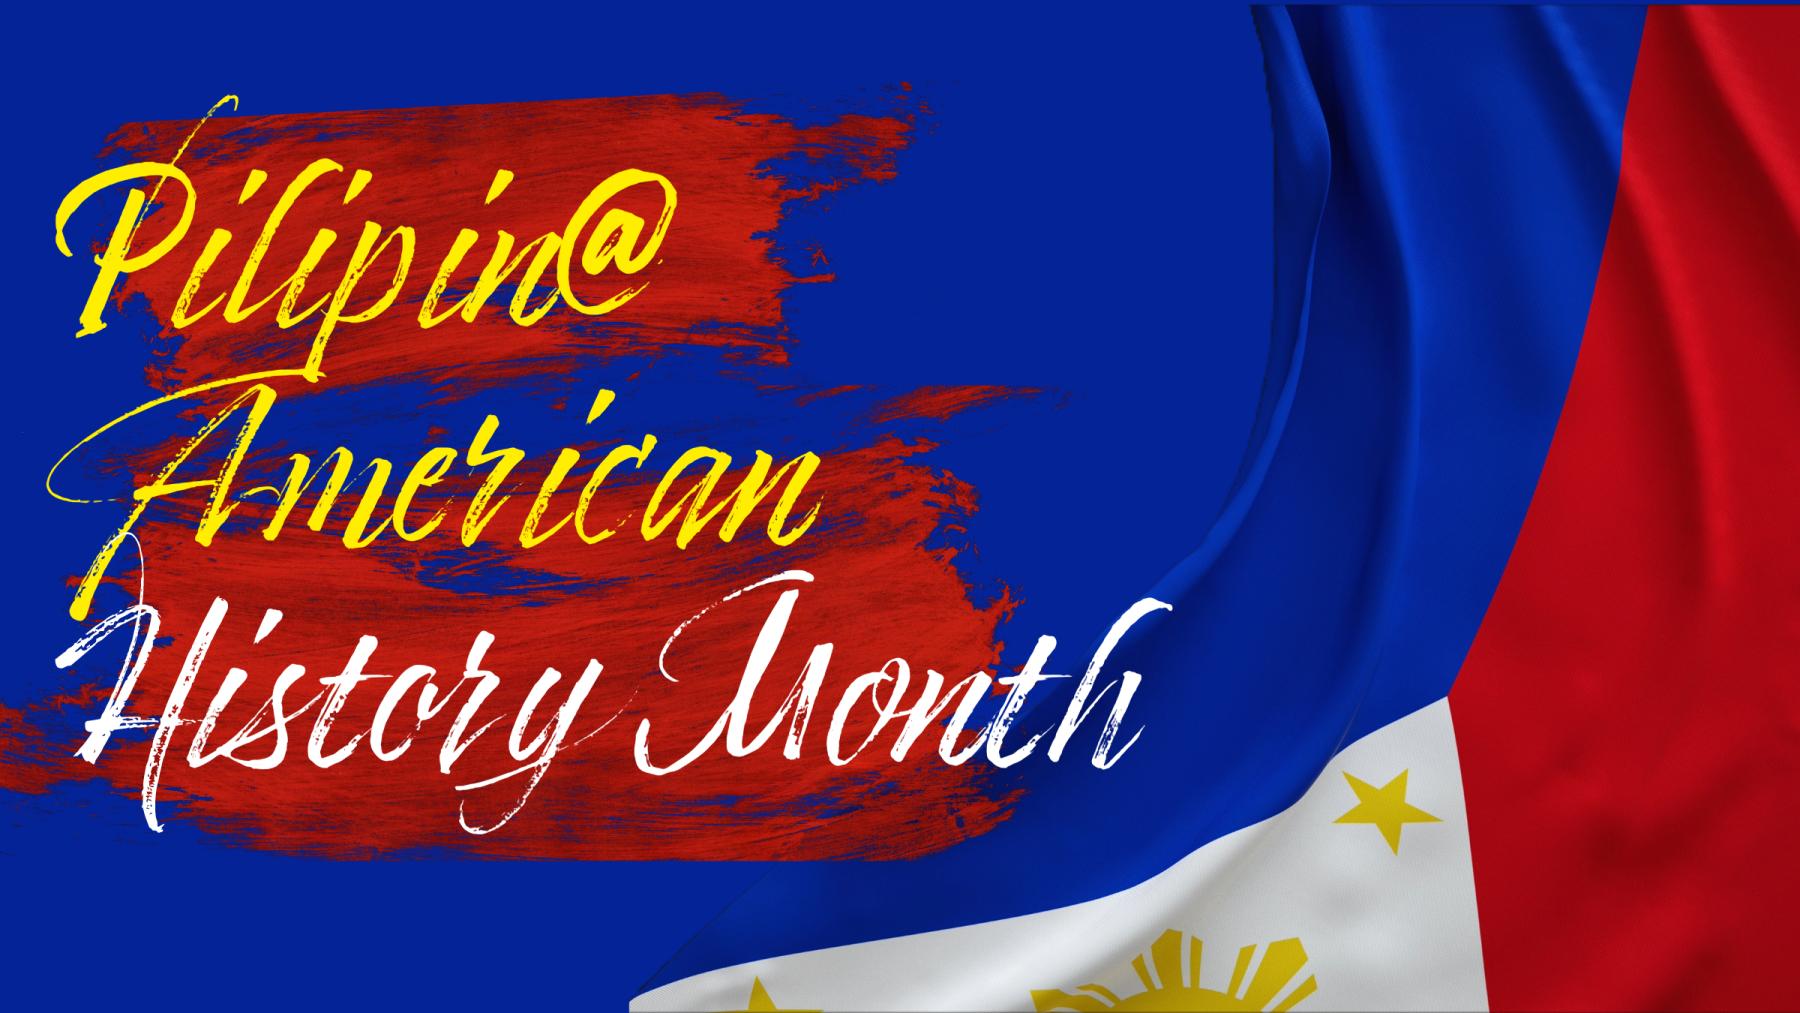 Navy blue background that has a portion of the Philippine's flag draped from the top right corner to the bottom right-middle. On top of red paint smears on the left-hand side is "Pilipin@ American History Month" in a cursive handwriting font. "Pilipin@ American" is in gold while "History Month" is in white.